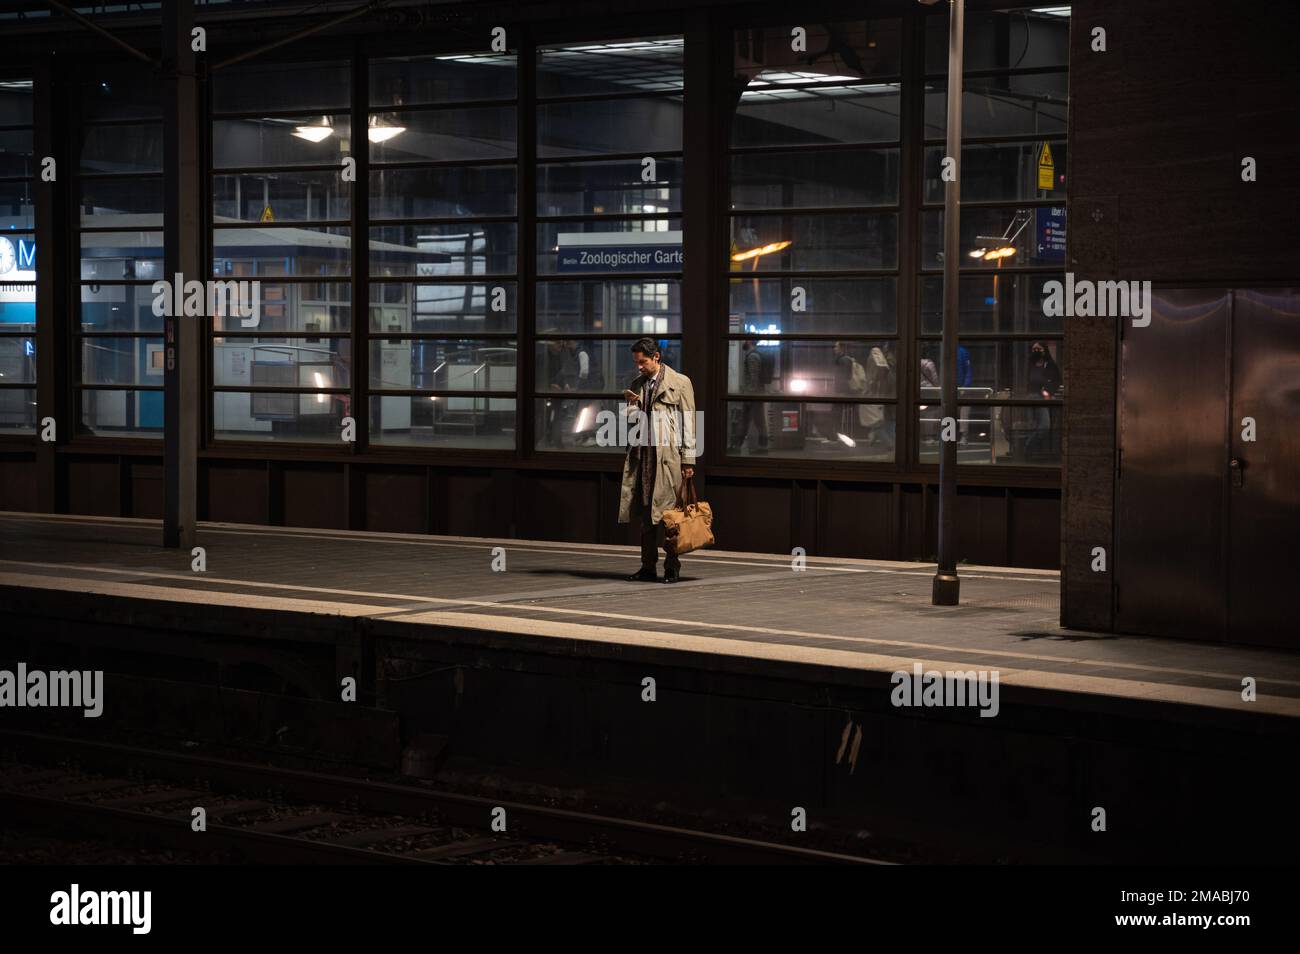 07.10.2022, Germany, , Berlin - A man stands alone on the platform at Zoologischer Garten station in the evening, staring at his cell phone while wait Stock Photo